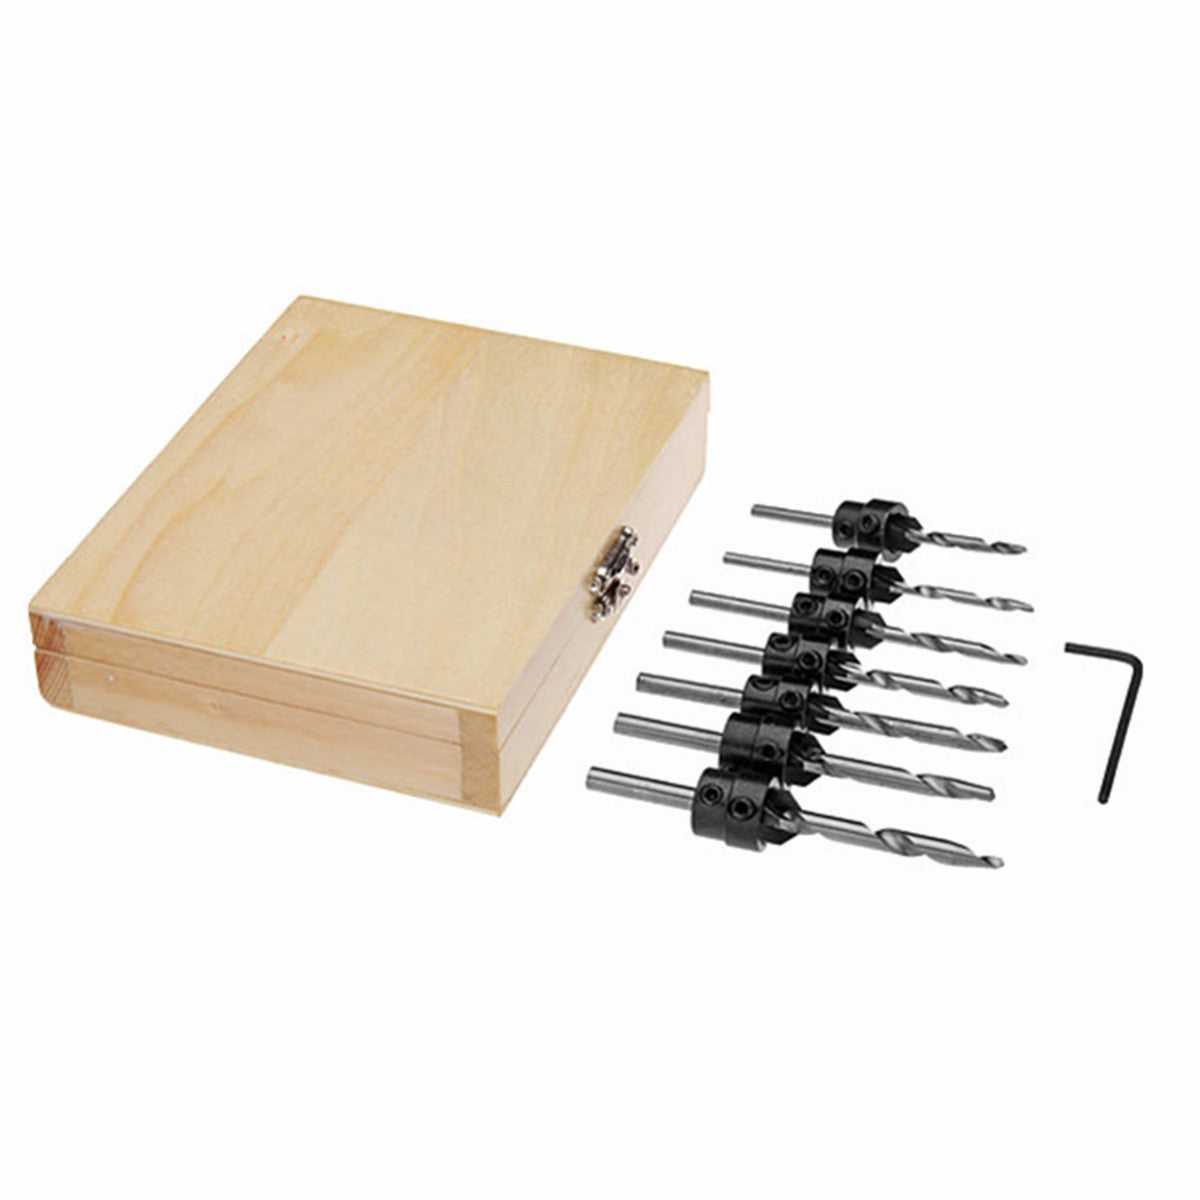 7pcs Countersink Drill Bit Set Tapered Stop Collar Wood Hole Screw Kit for Woodworking